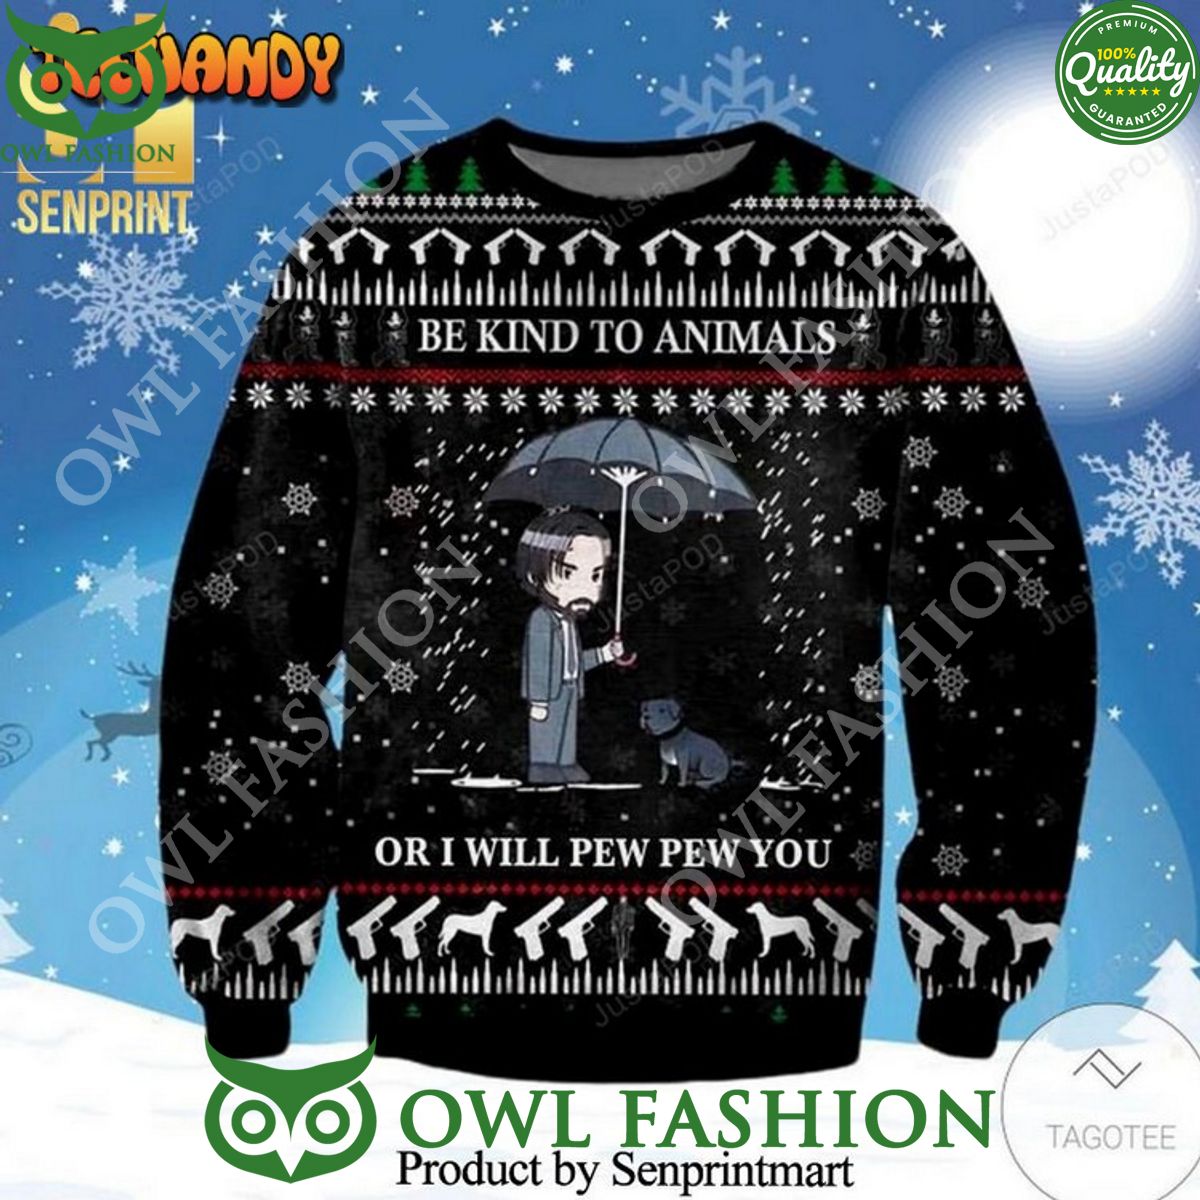 be kind to animal john wick knitted ugly christmas sweater 1 AnWpn.jpg